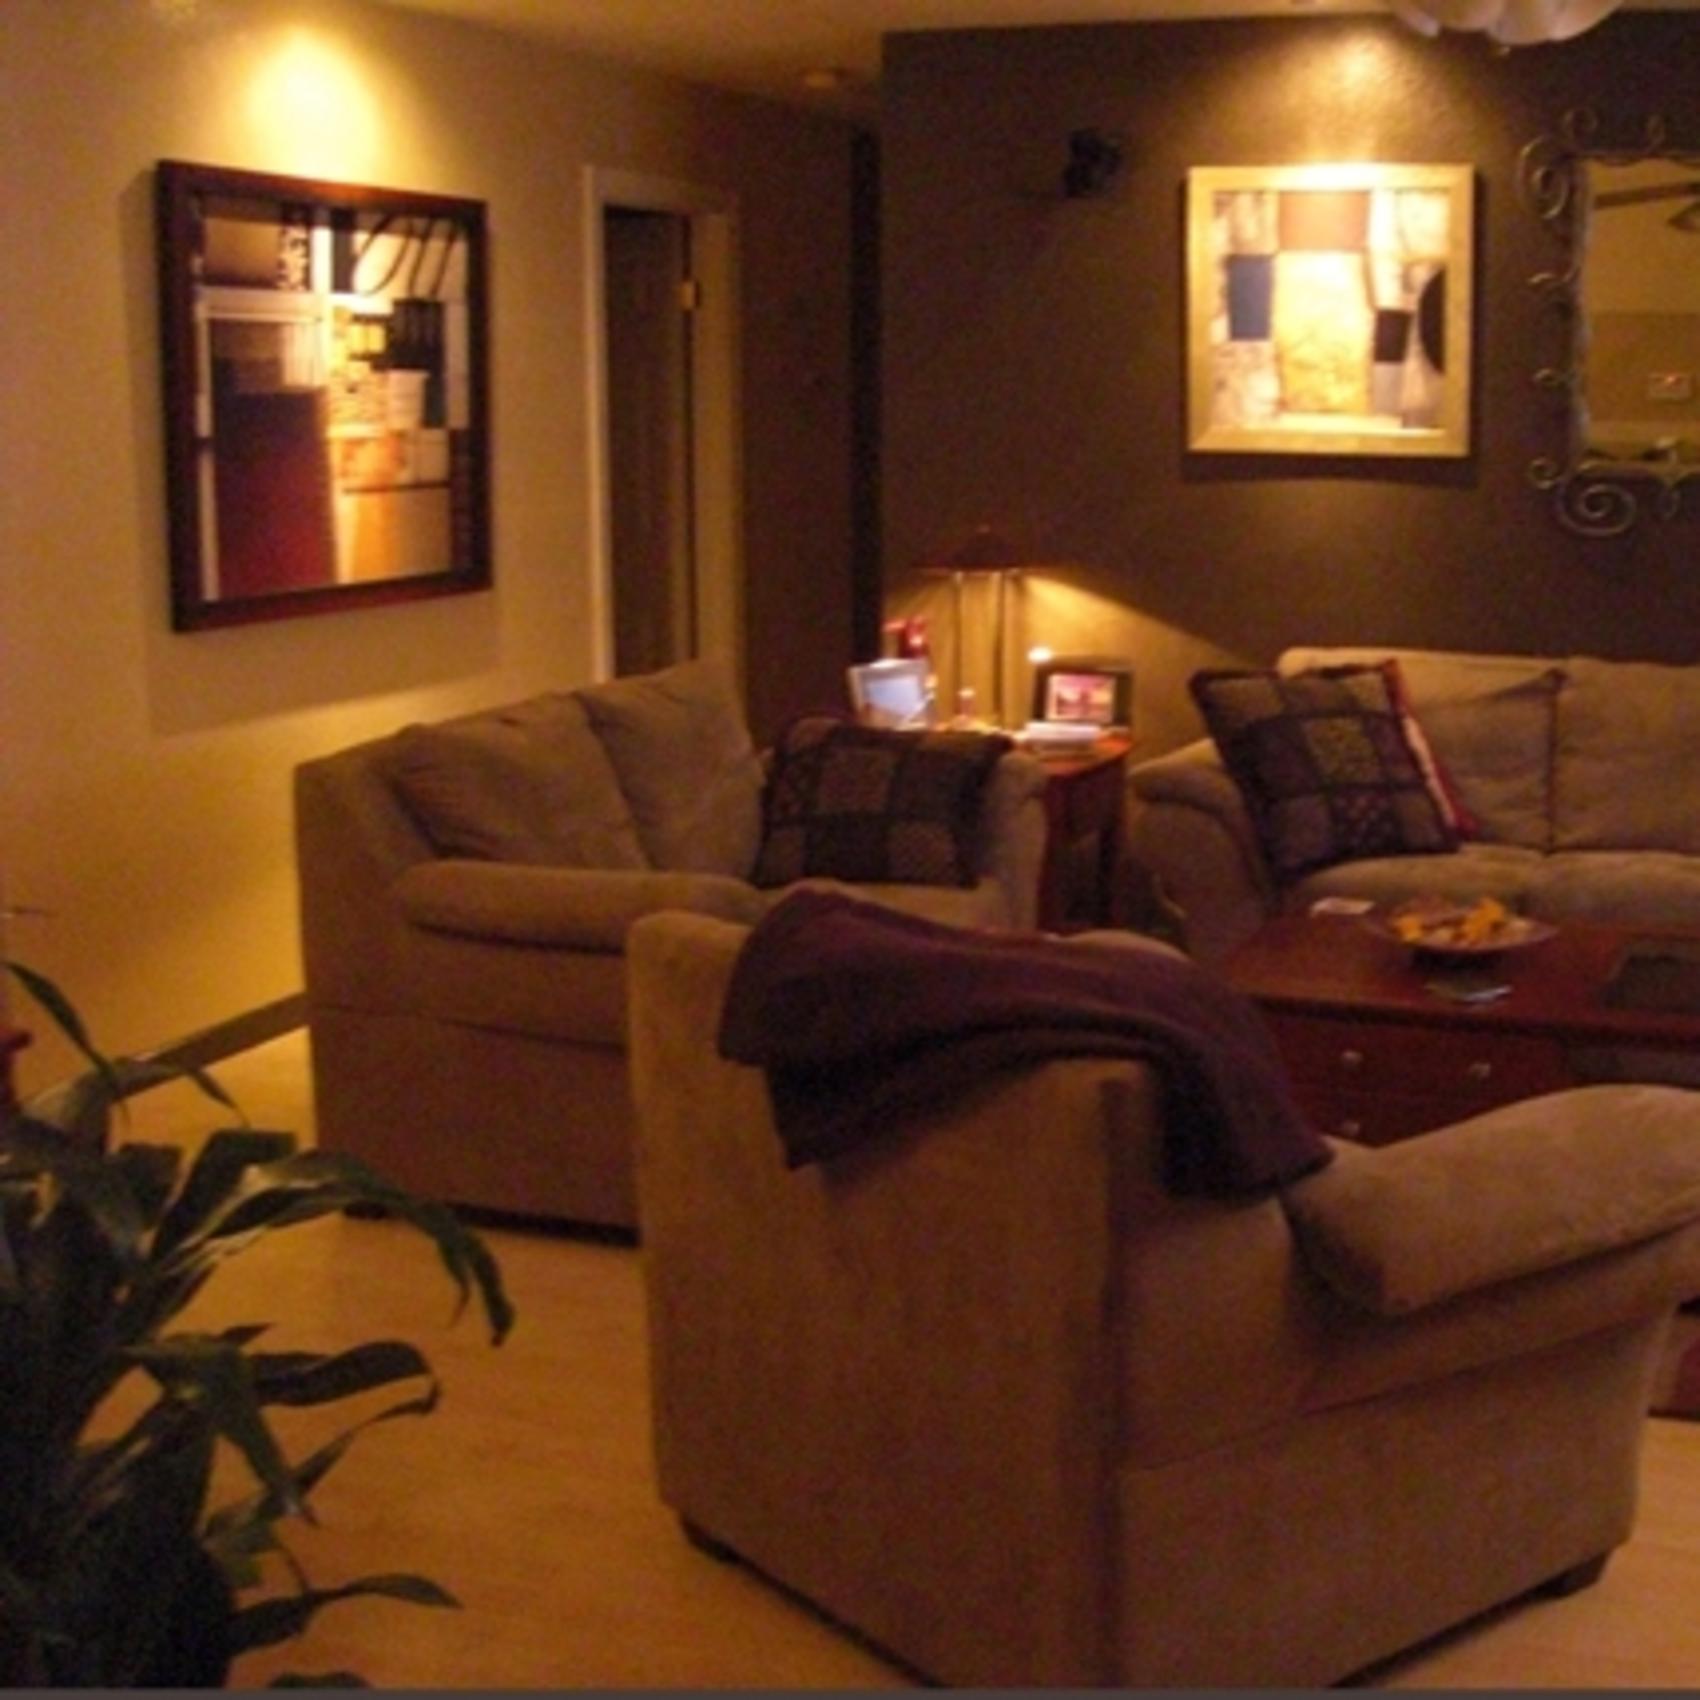 Living Room After... Dark Brown Accent Wall creates drama but the natural colors keep it inviting.